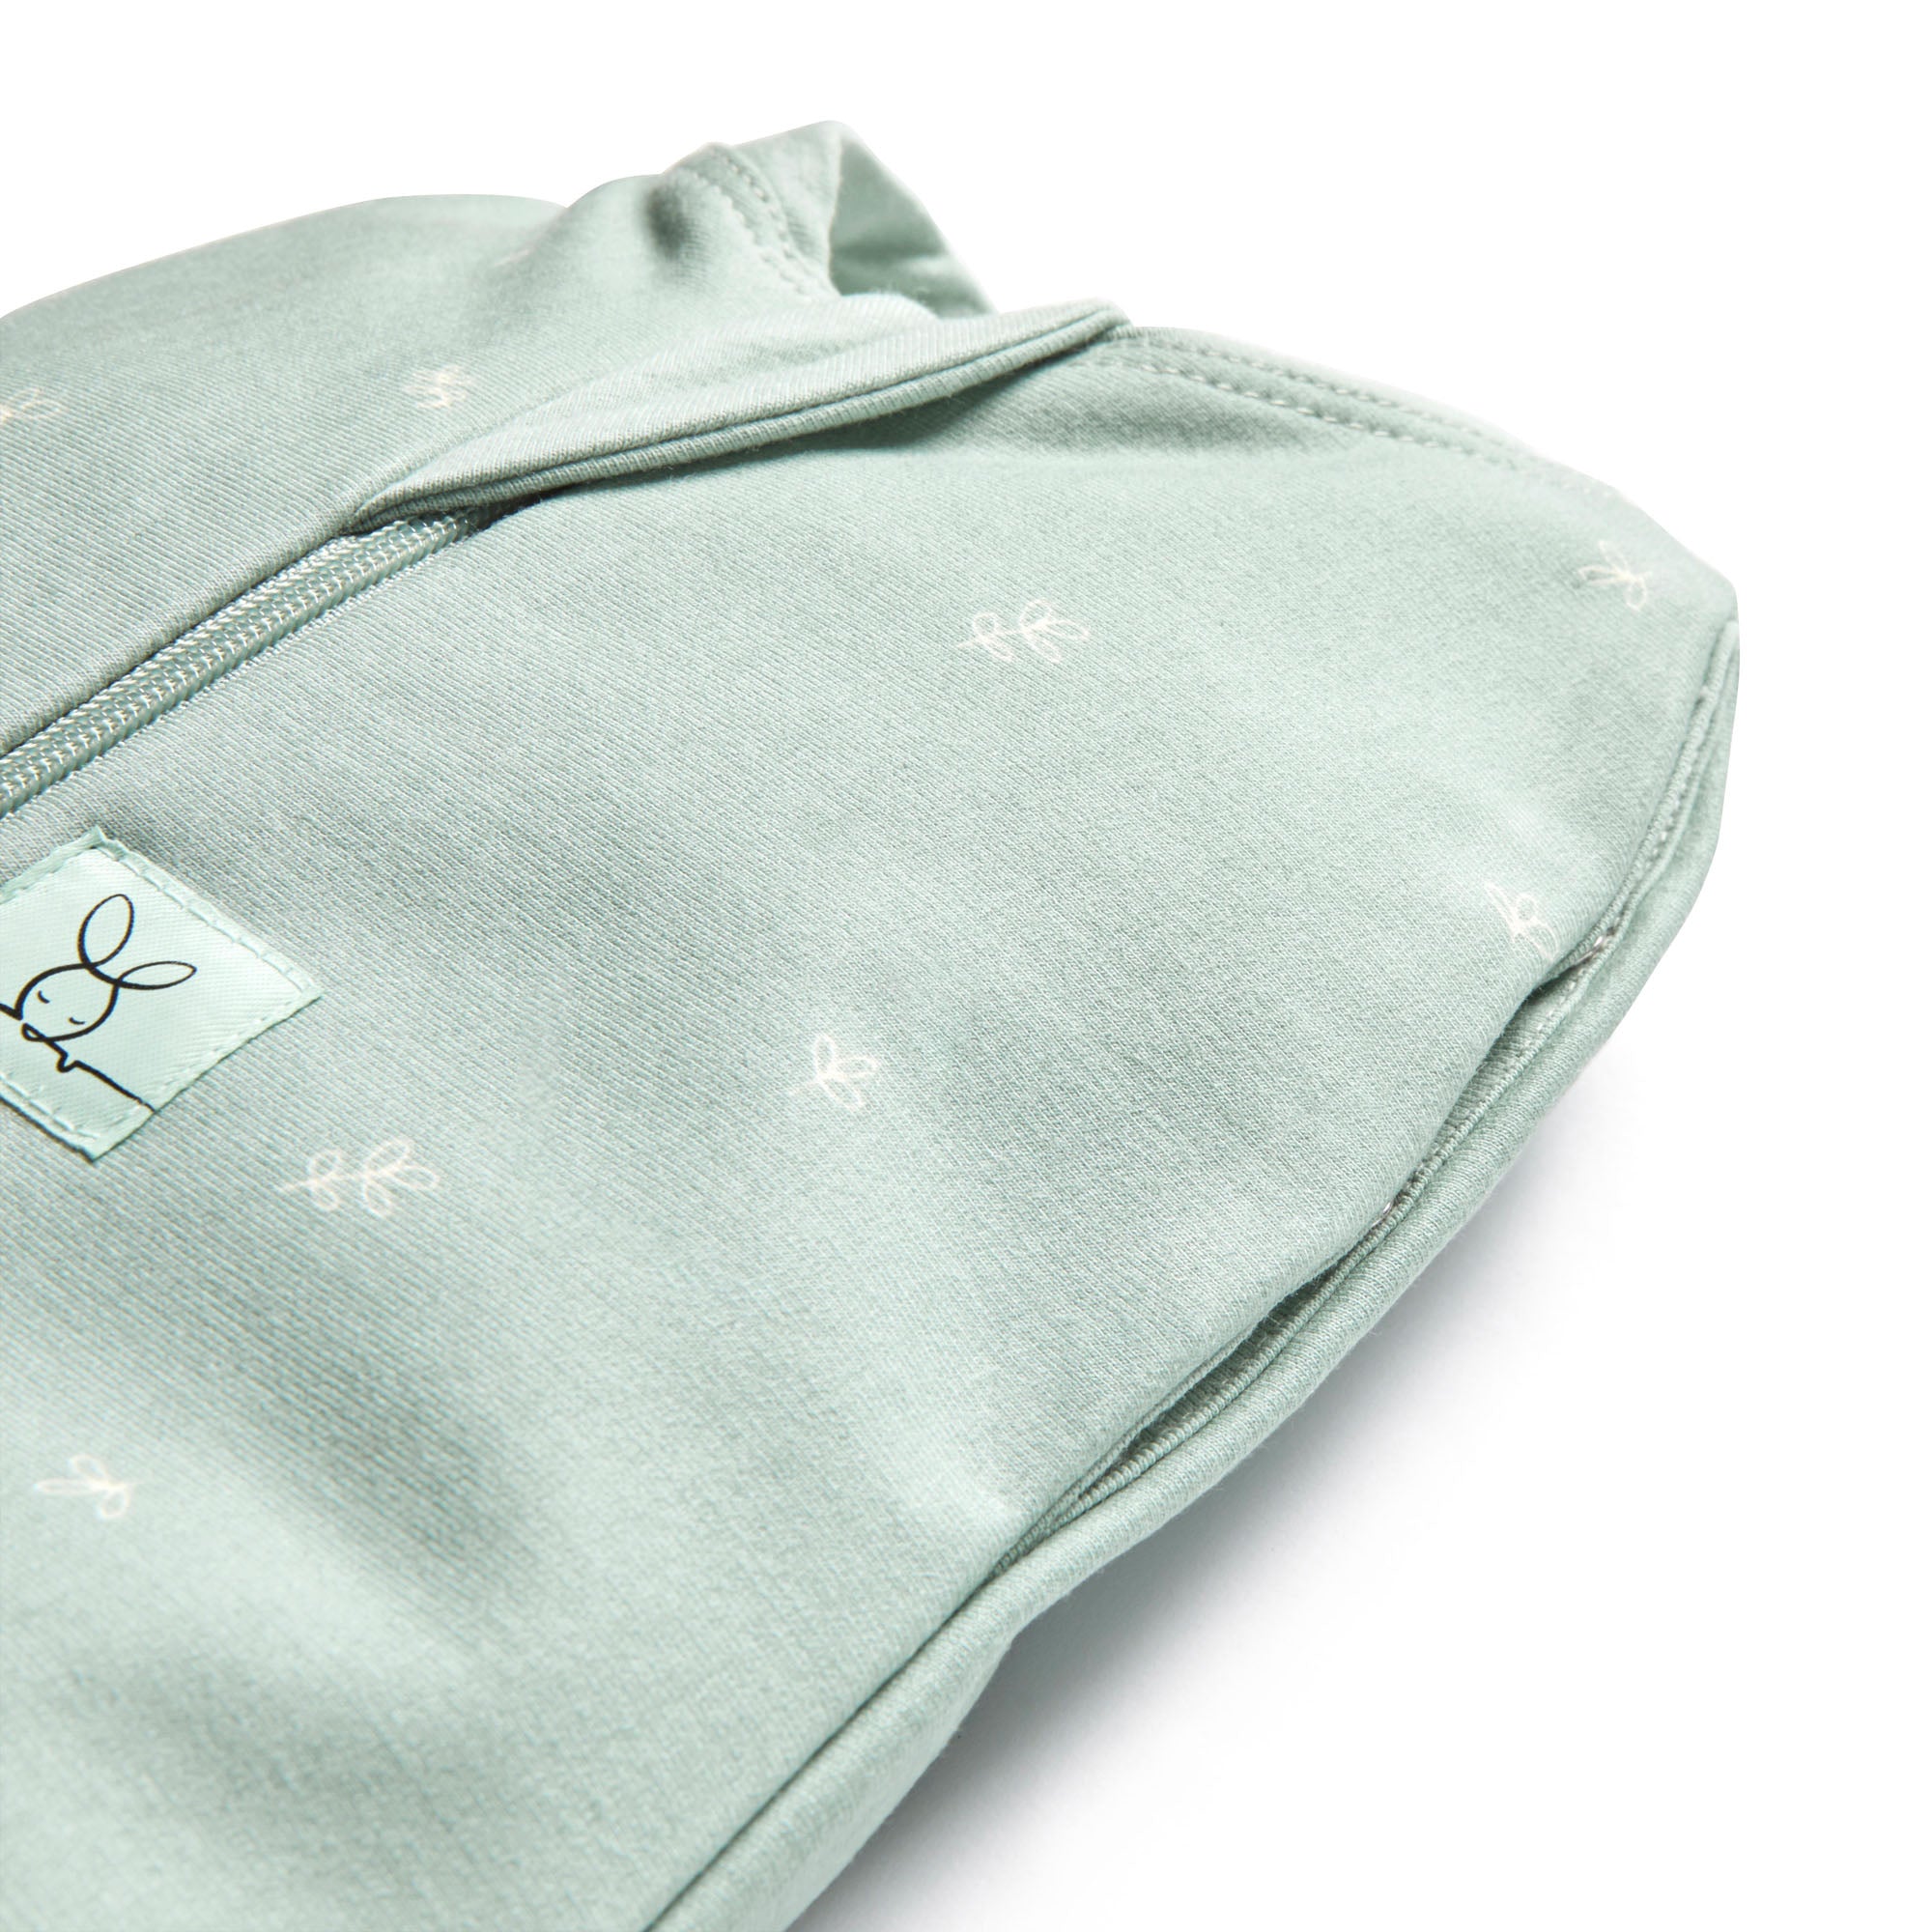 ergopouch-cocoon-swaddle-bag-0-2-tog-night-sky-ergo-zepco-0-2t00-03mns20- (3)